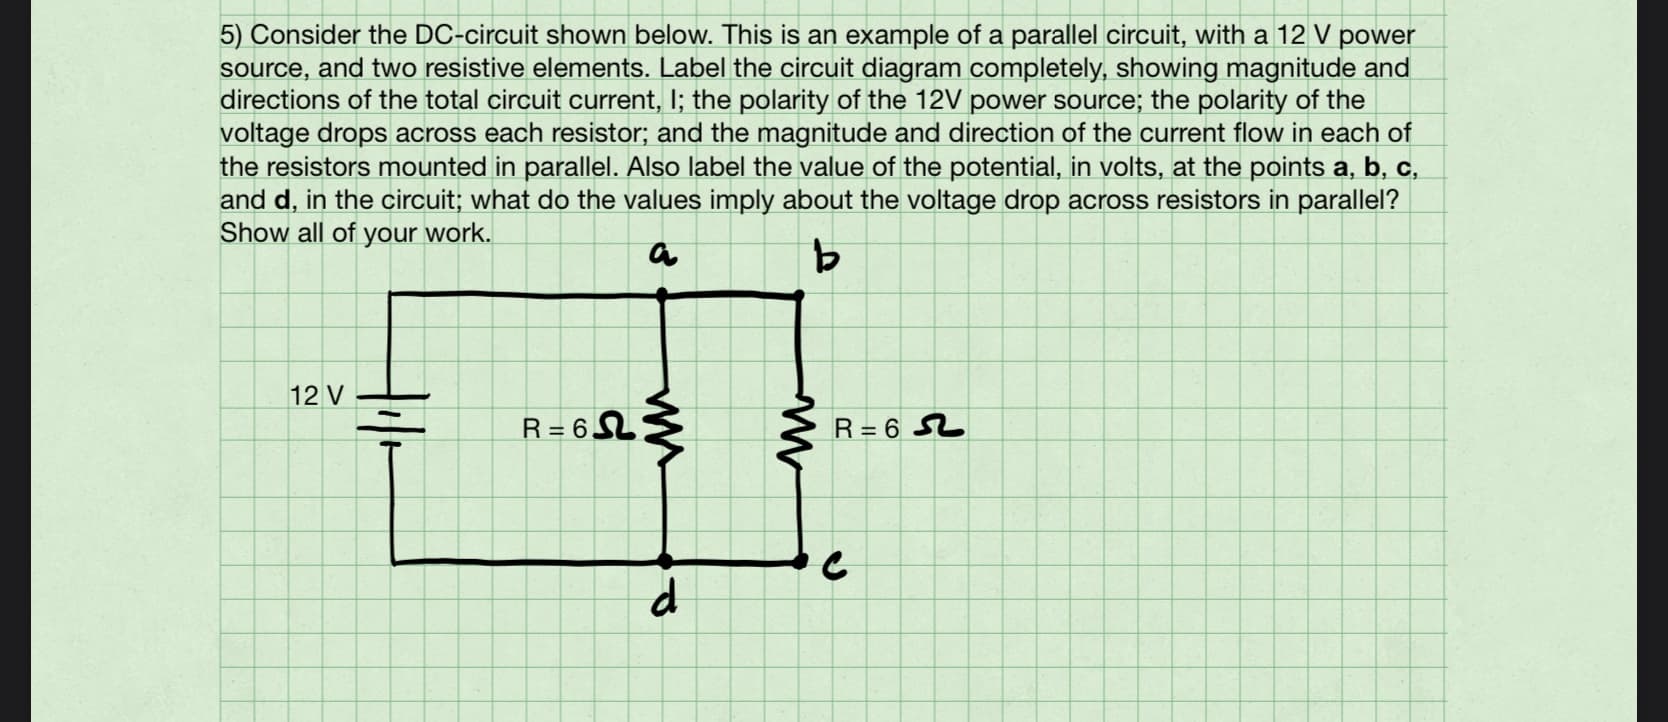 5) Consider the DC-circuit shown below. This is an example of a parallel circuit, with a 12 V power
source, and two resistive elements. Label the circuit diagram completely, showing magnitude and
directions of the total circuit current, I; the polarity of the 12V power source; the polarity of the
voltage drops across each resistor; and the magnitude and direction of the current flow in each of
the resistors mounted in parallel. Also label the value of the potential, in volts, at the points a, b, c,
and d, in the circuit; what do the values imply about the voltage drop across resistors in parallel?
Show all of your work.
12 V
R= 6LŹ
R= 6 S2
